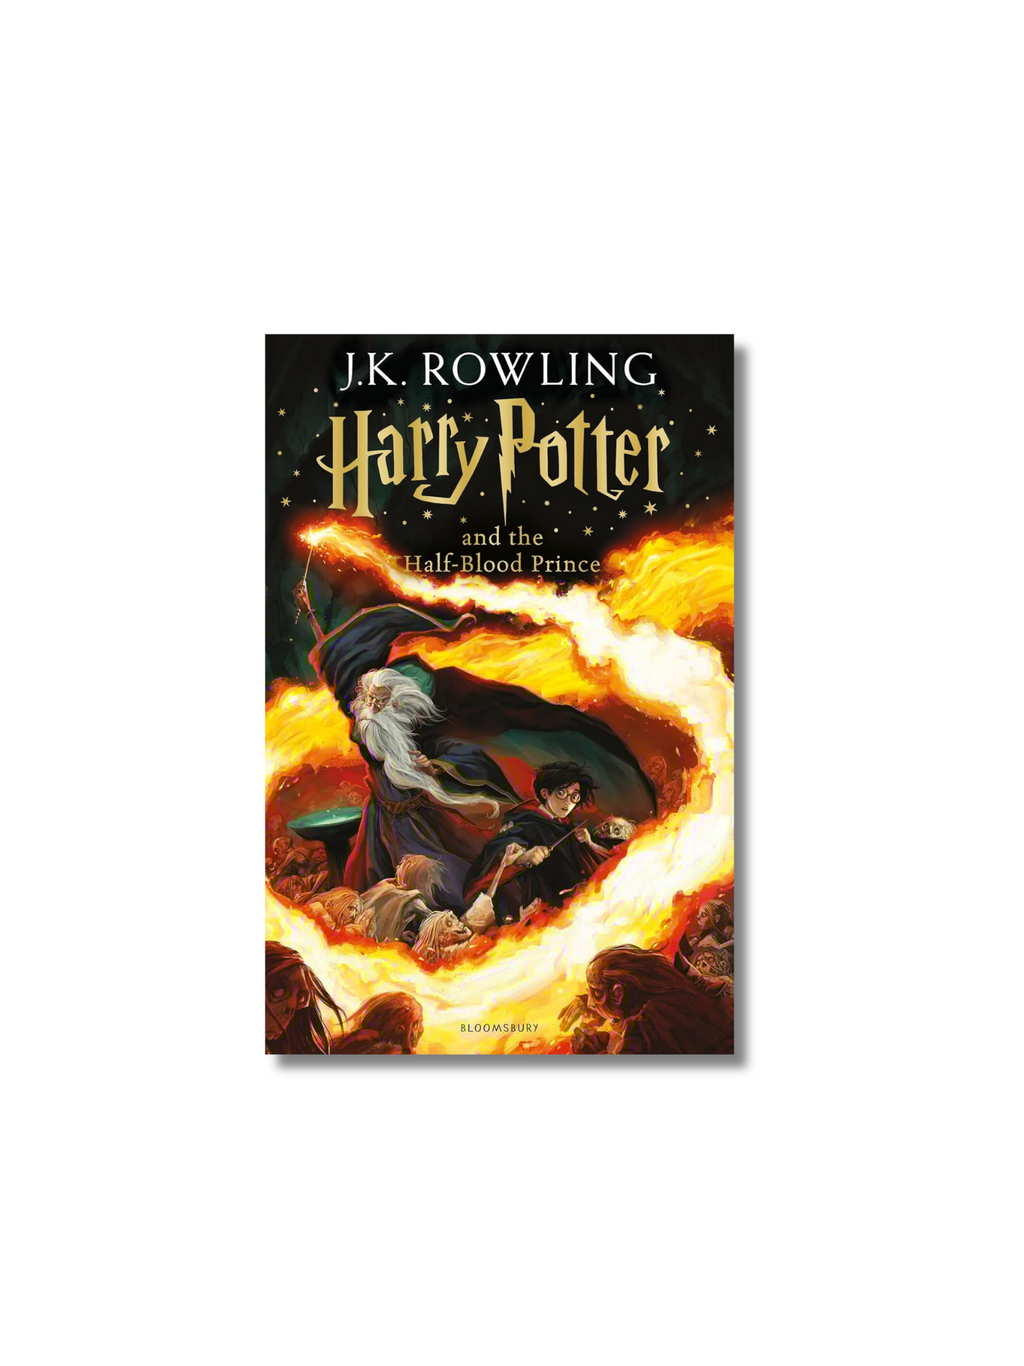 Harry Potter and the Half-Blood Prince (Harry Potter, 6)